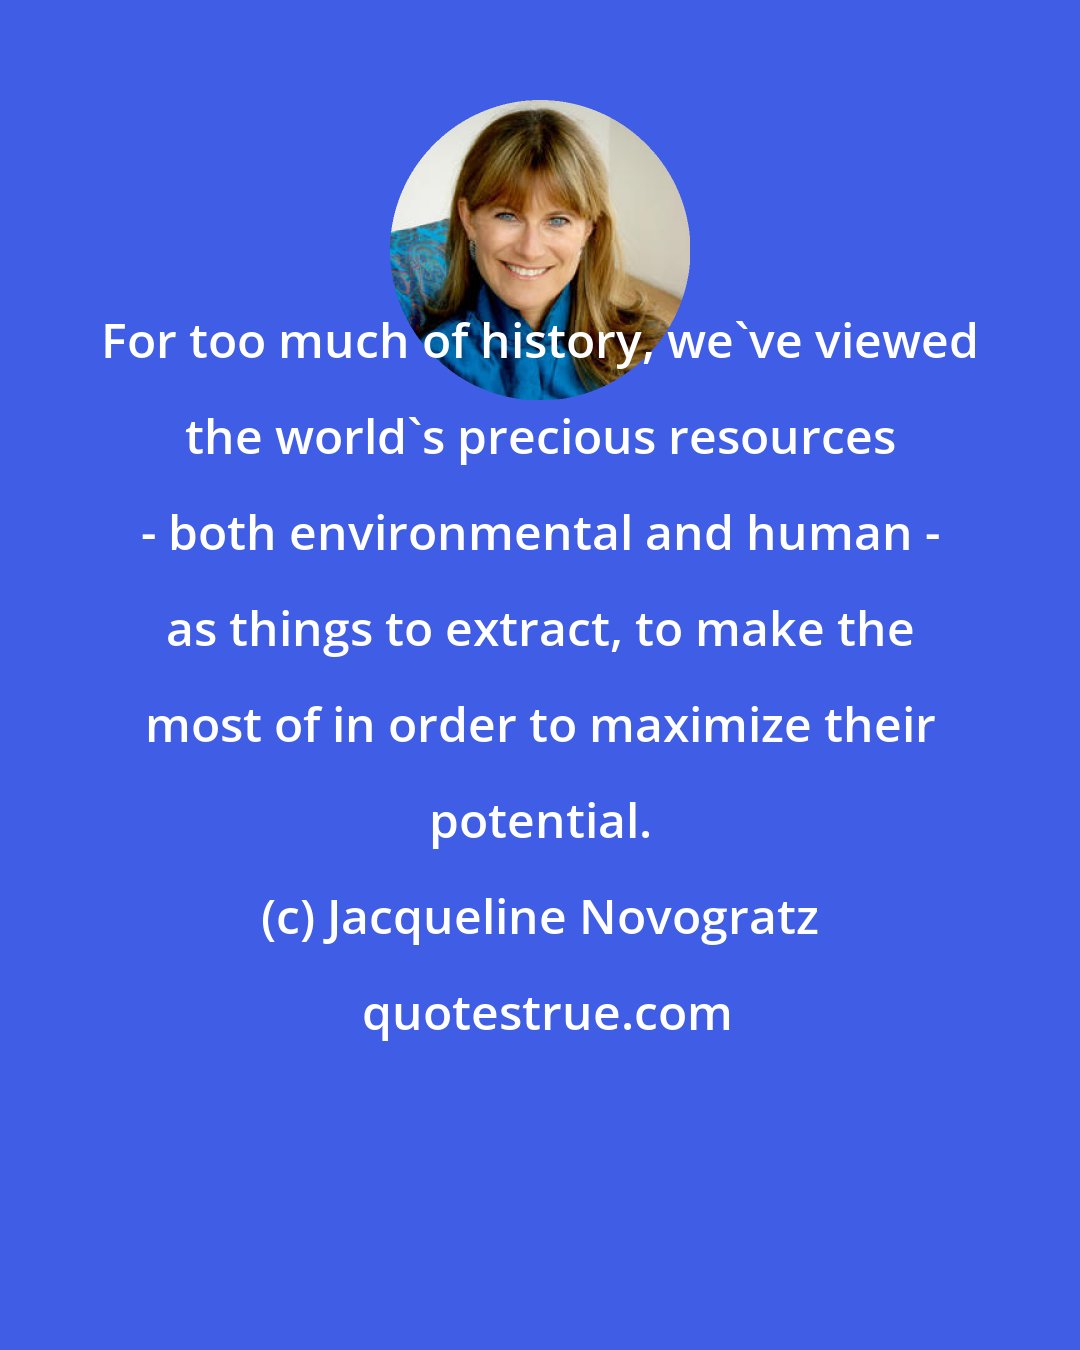 Jacqueline Novogratz: For too much of history, we've viewed the world's precious resources - both environmental and human - as things to extract, to make the most of in order to maximize their potential.